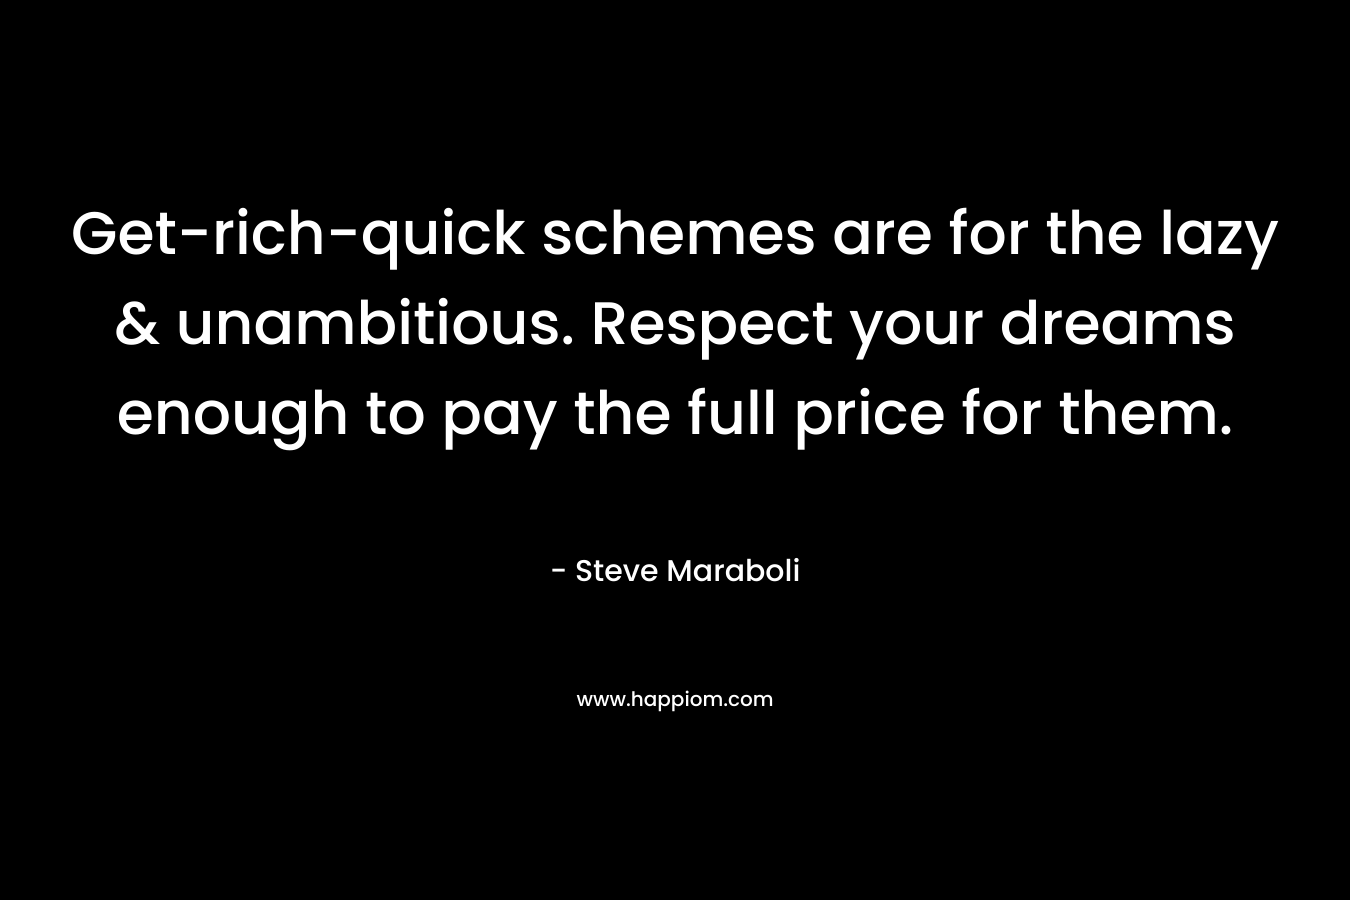 Get-rich-quick schemes are for the lazy & unambitious. Respect your dreams enough to pay the full price for them.